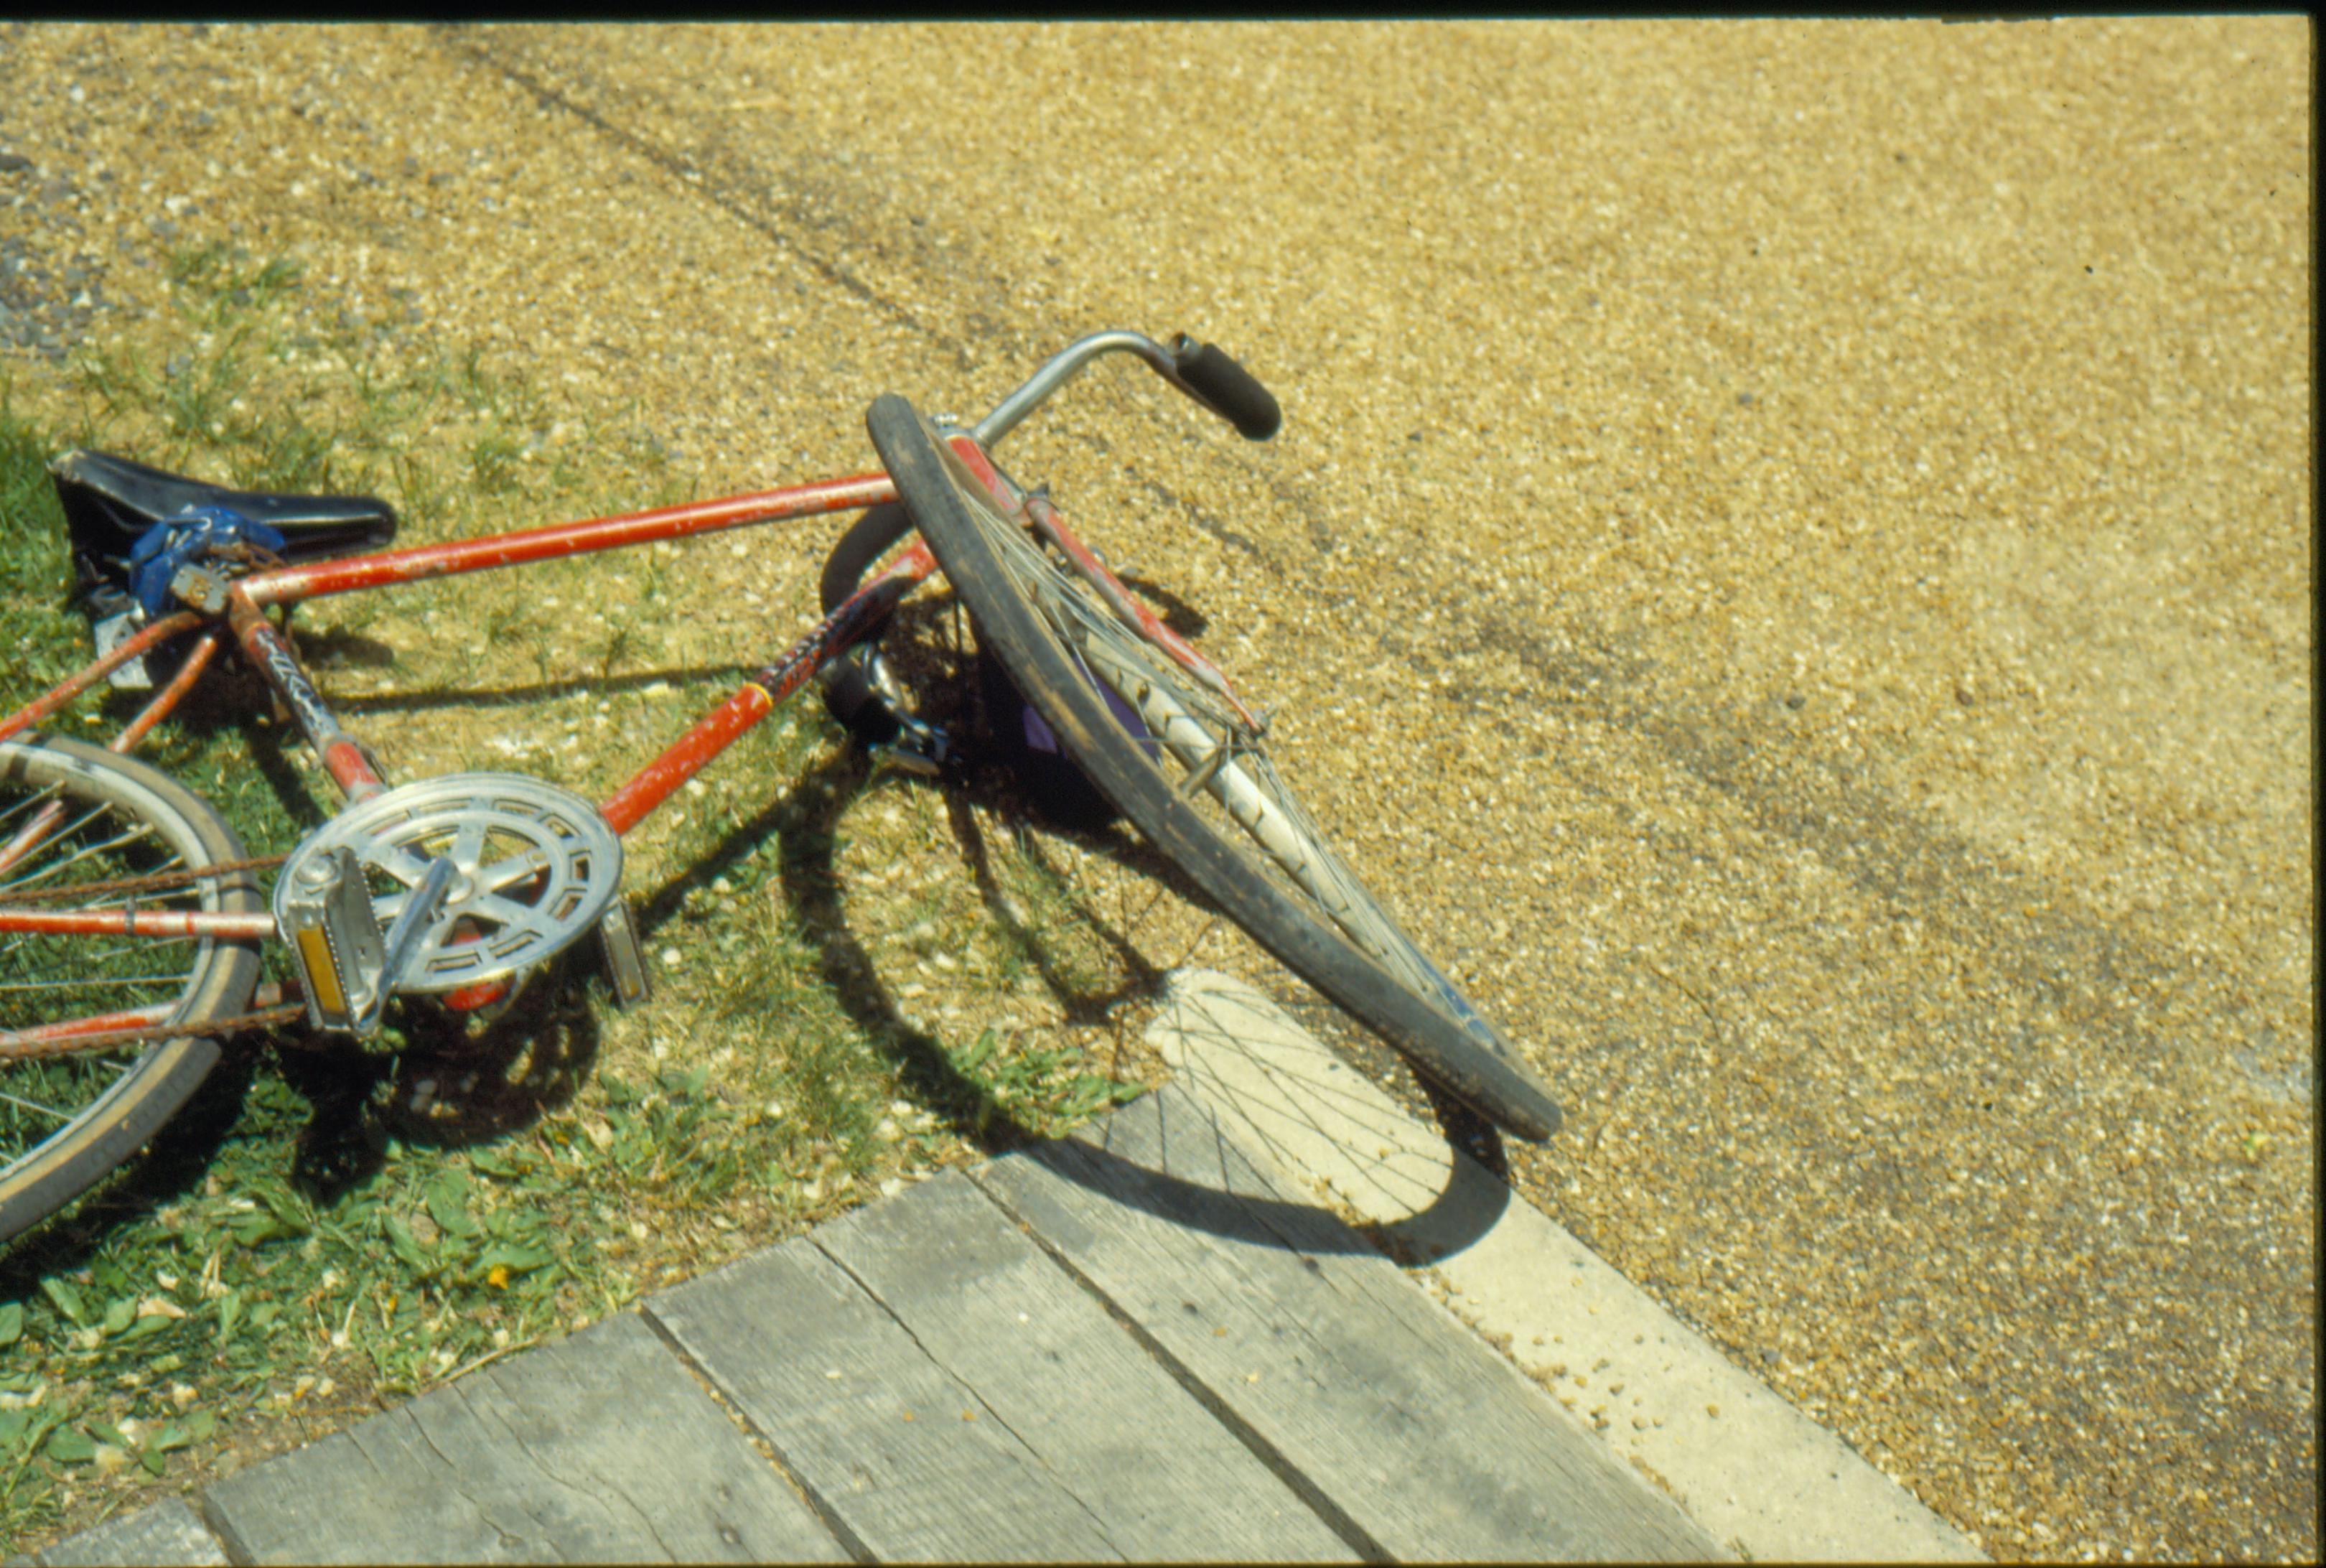 Bicycle Accident - Morse House - 1987 Law Enforcement, Accidents, Bicycle